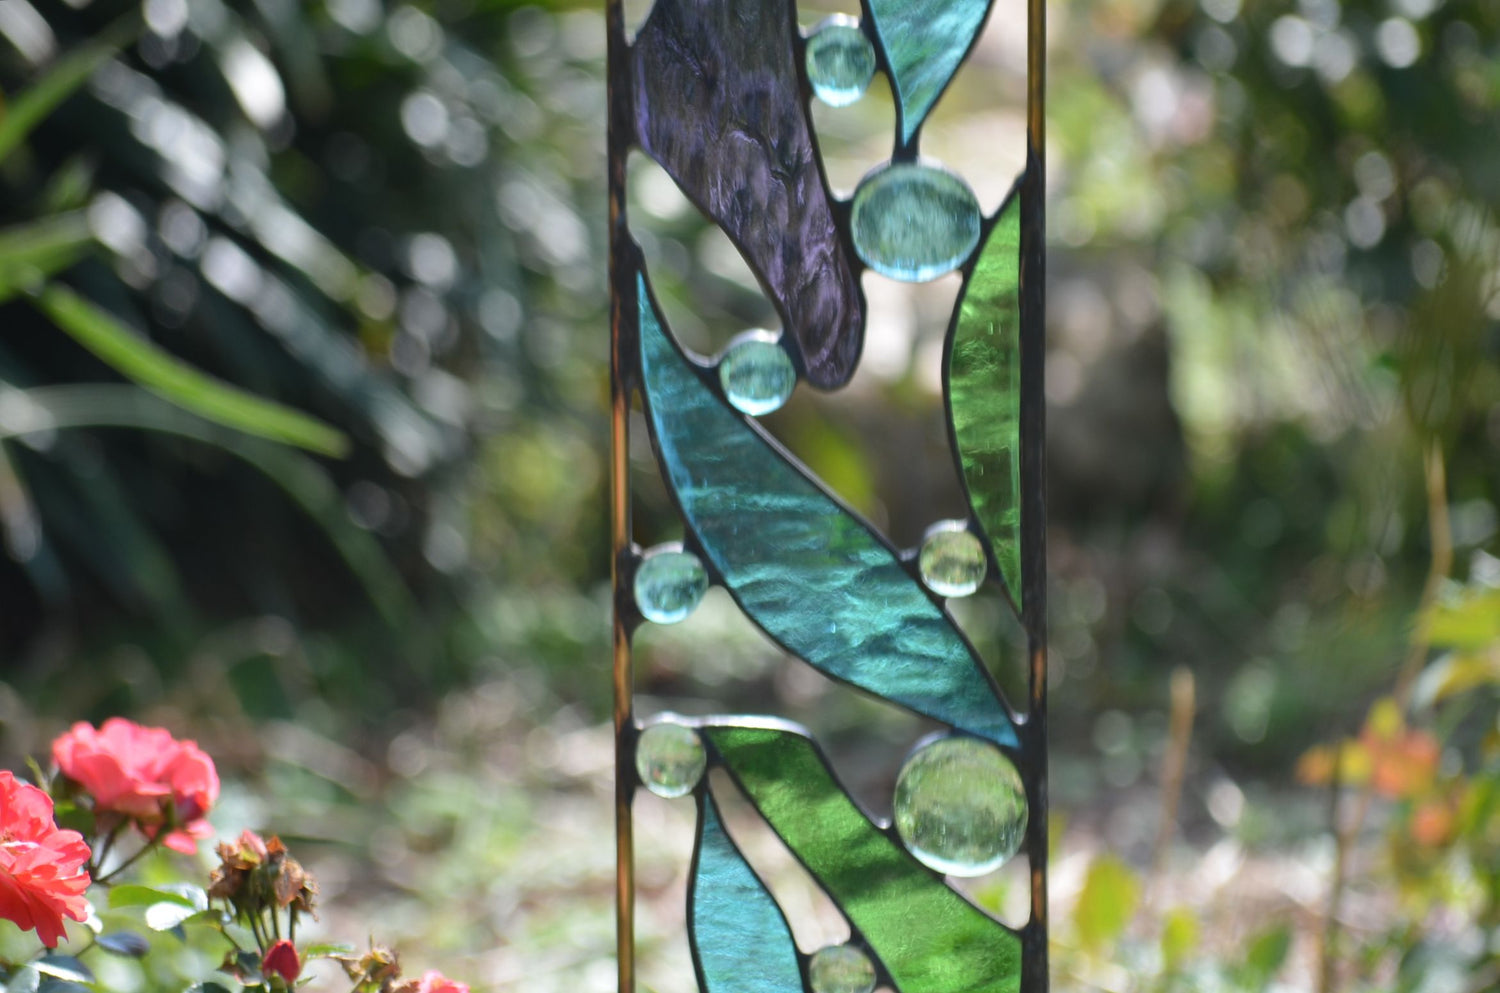 Stained Glass Lawn Art for Outdoor Garden Decorating. &quot;Garden Genie&quot;